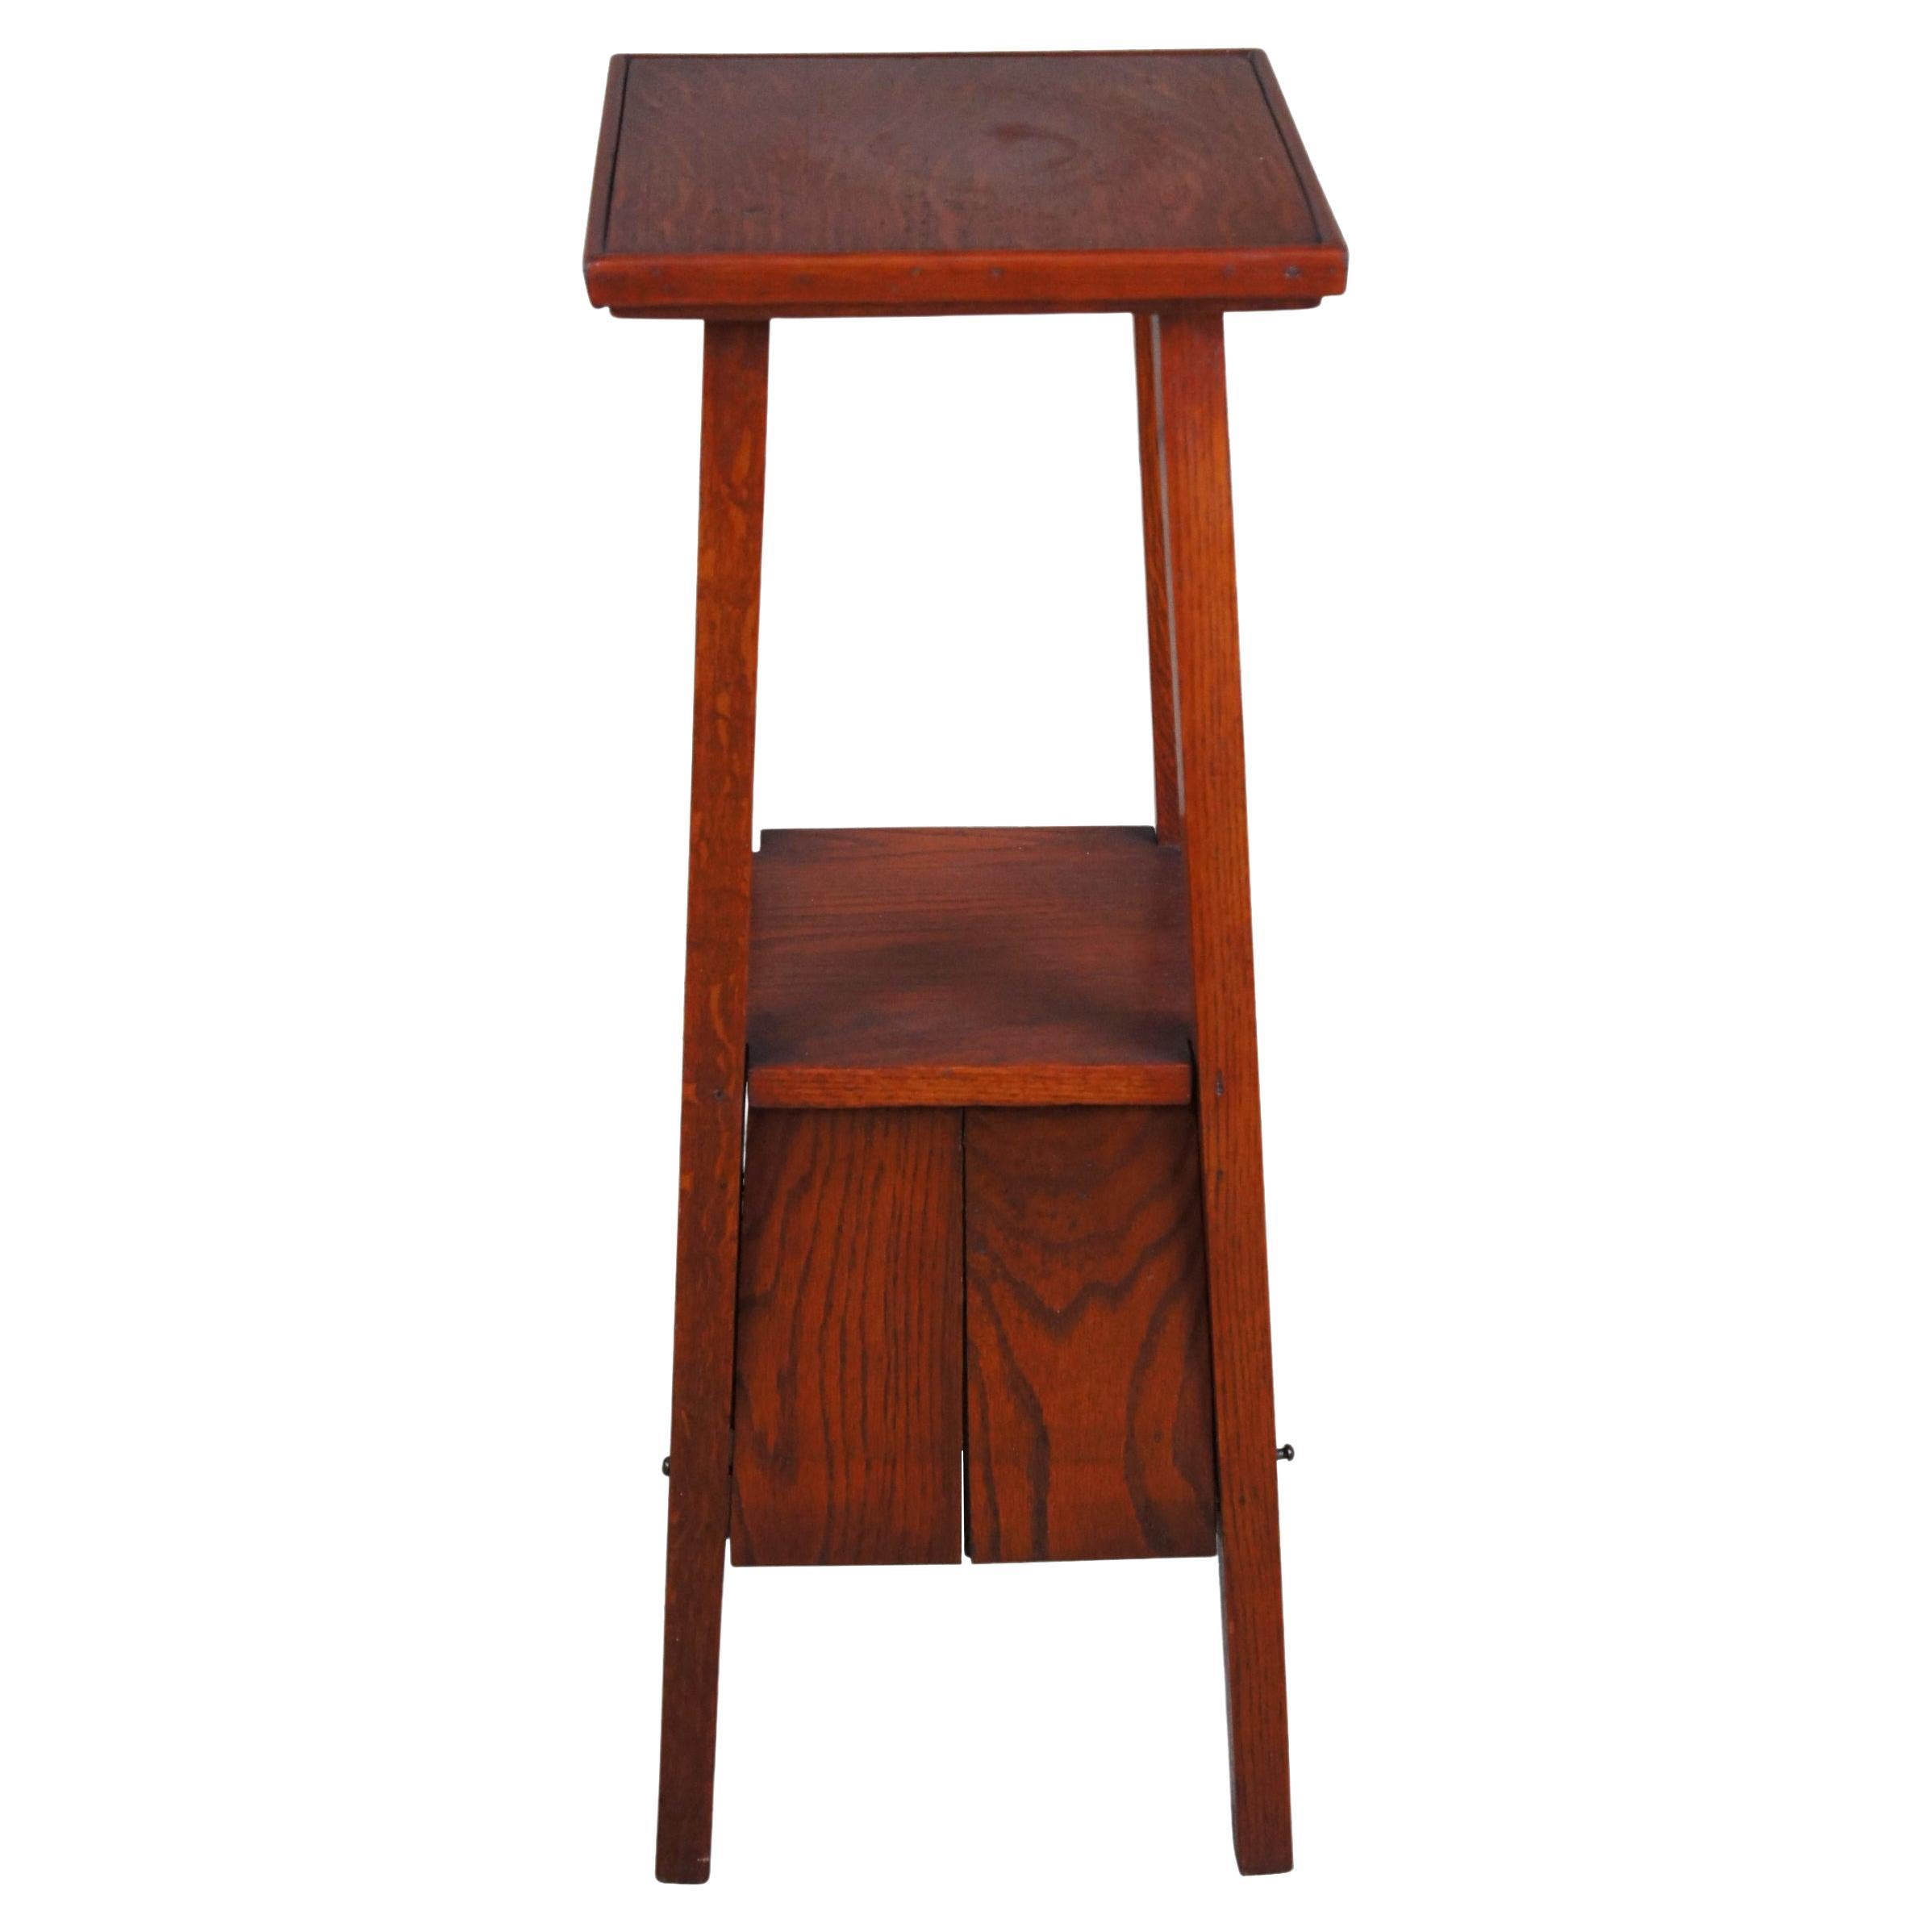 An early 1900s craftsman tiered smoking stand with lower concealed drop front cabinet. Made from oak with long square posts.